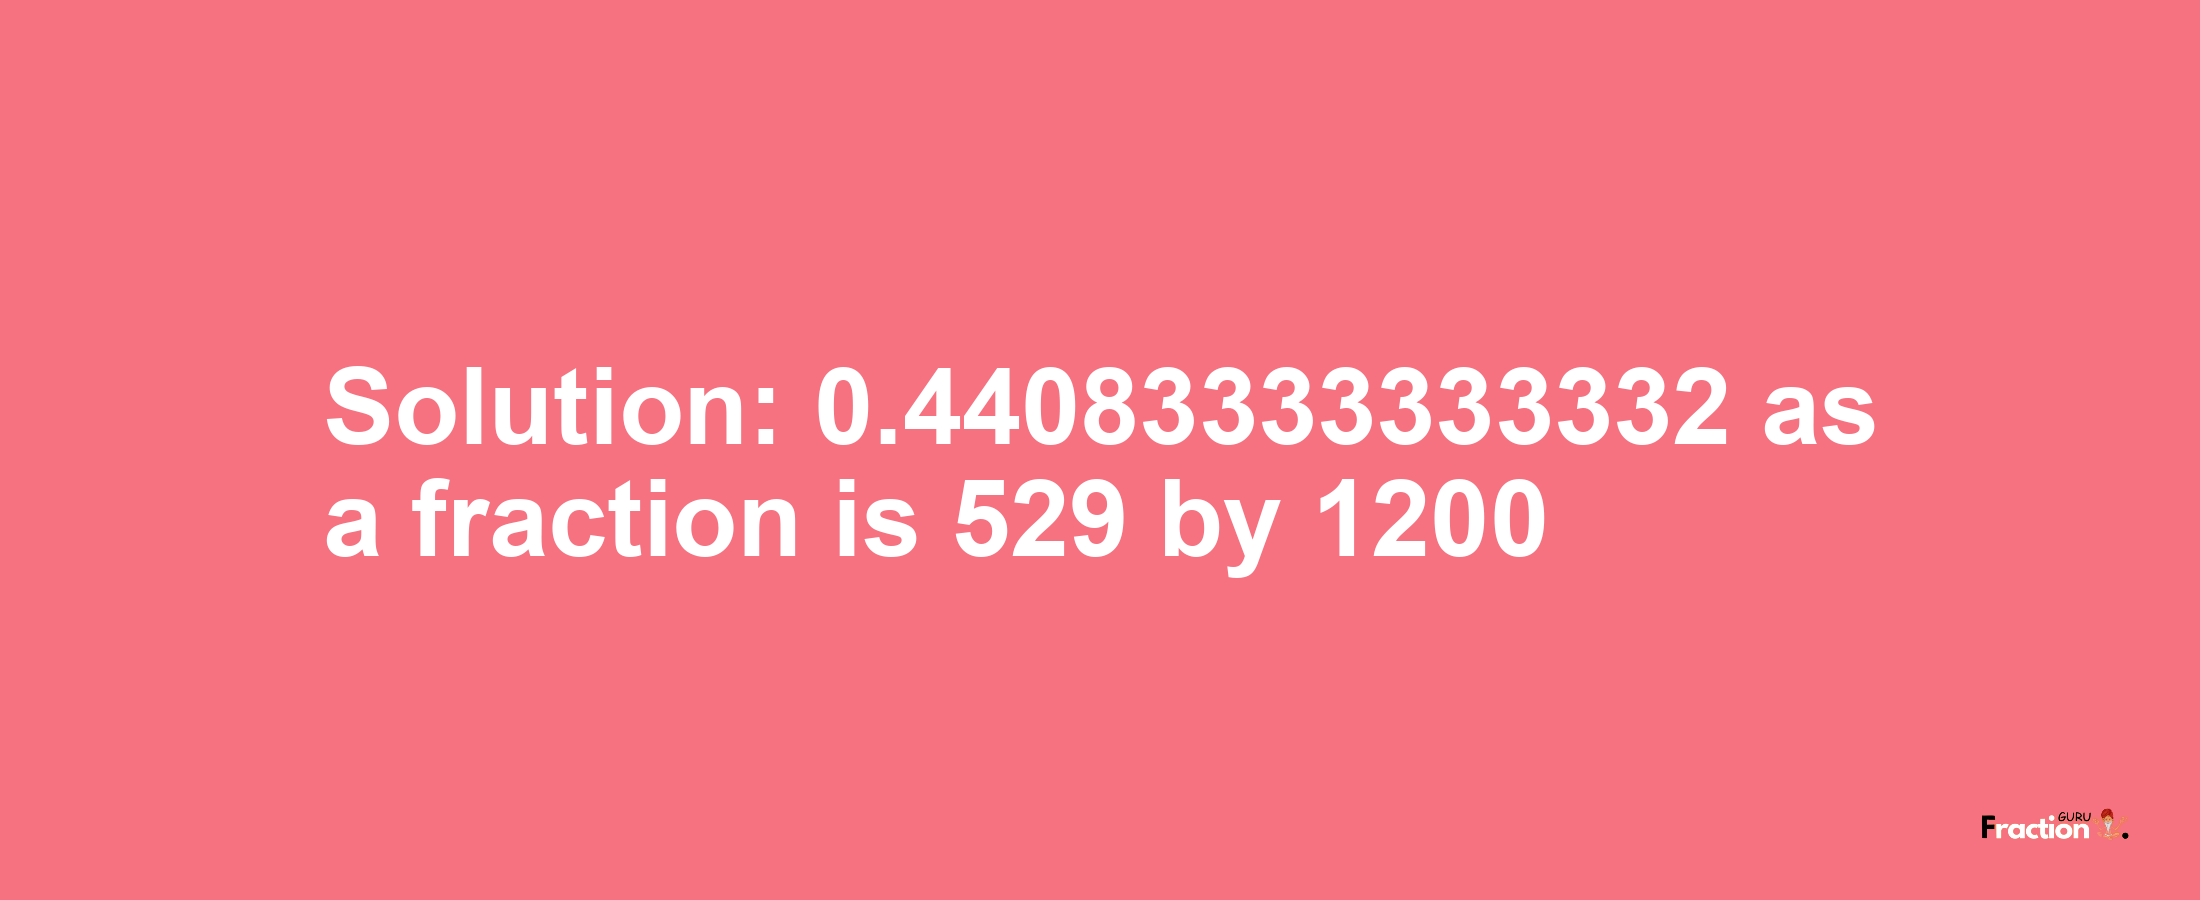 Solution:0.44083333333332 as a fraction is 529/1200